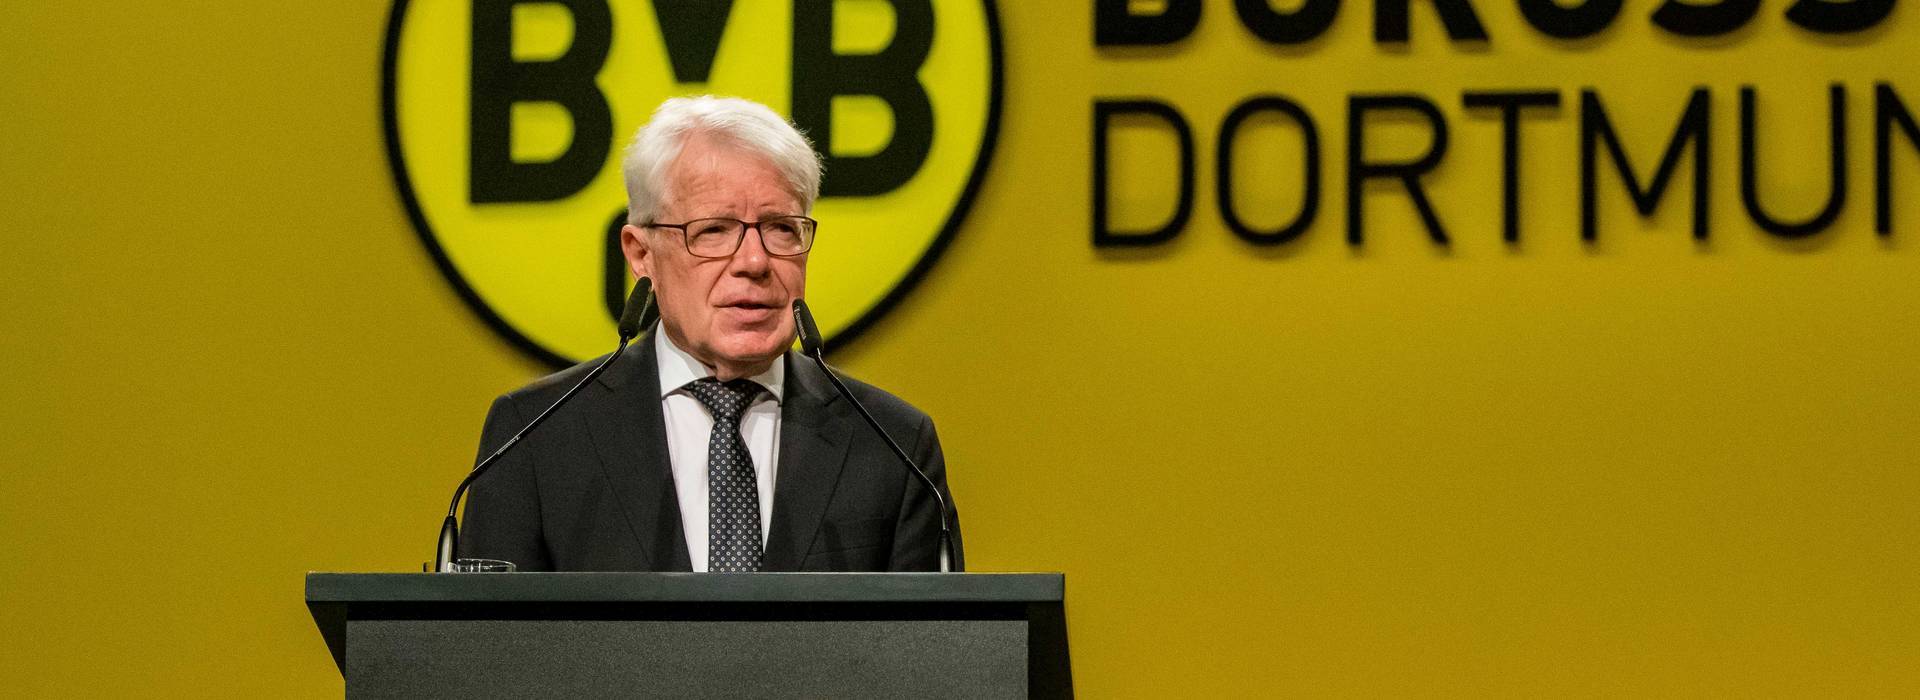 BVB president Rauball will not stand for re-election in November